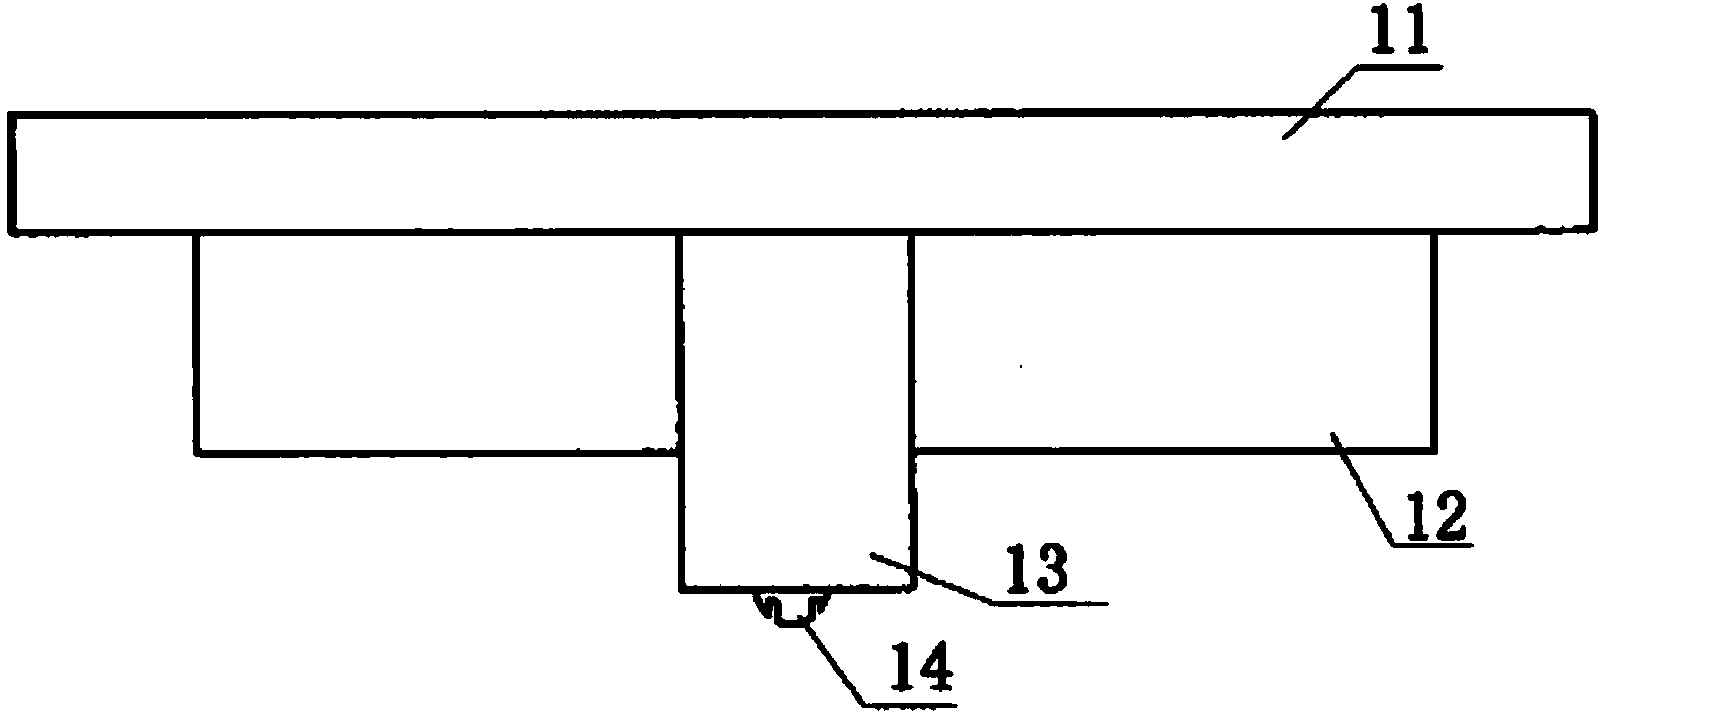 Comber cleaner, apparatus making same, and integral insert applied to apparatus